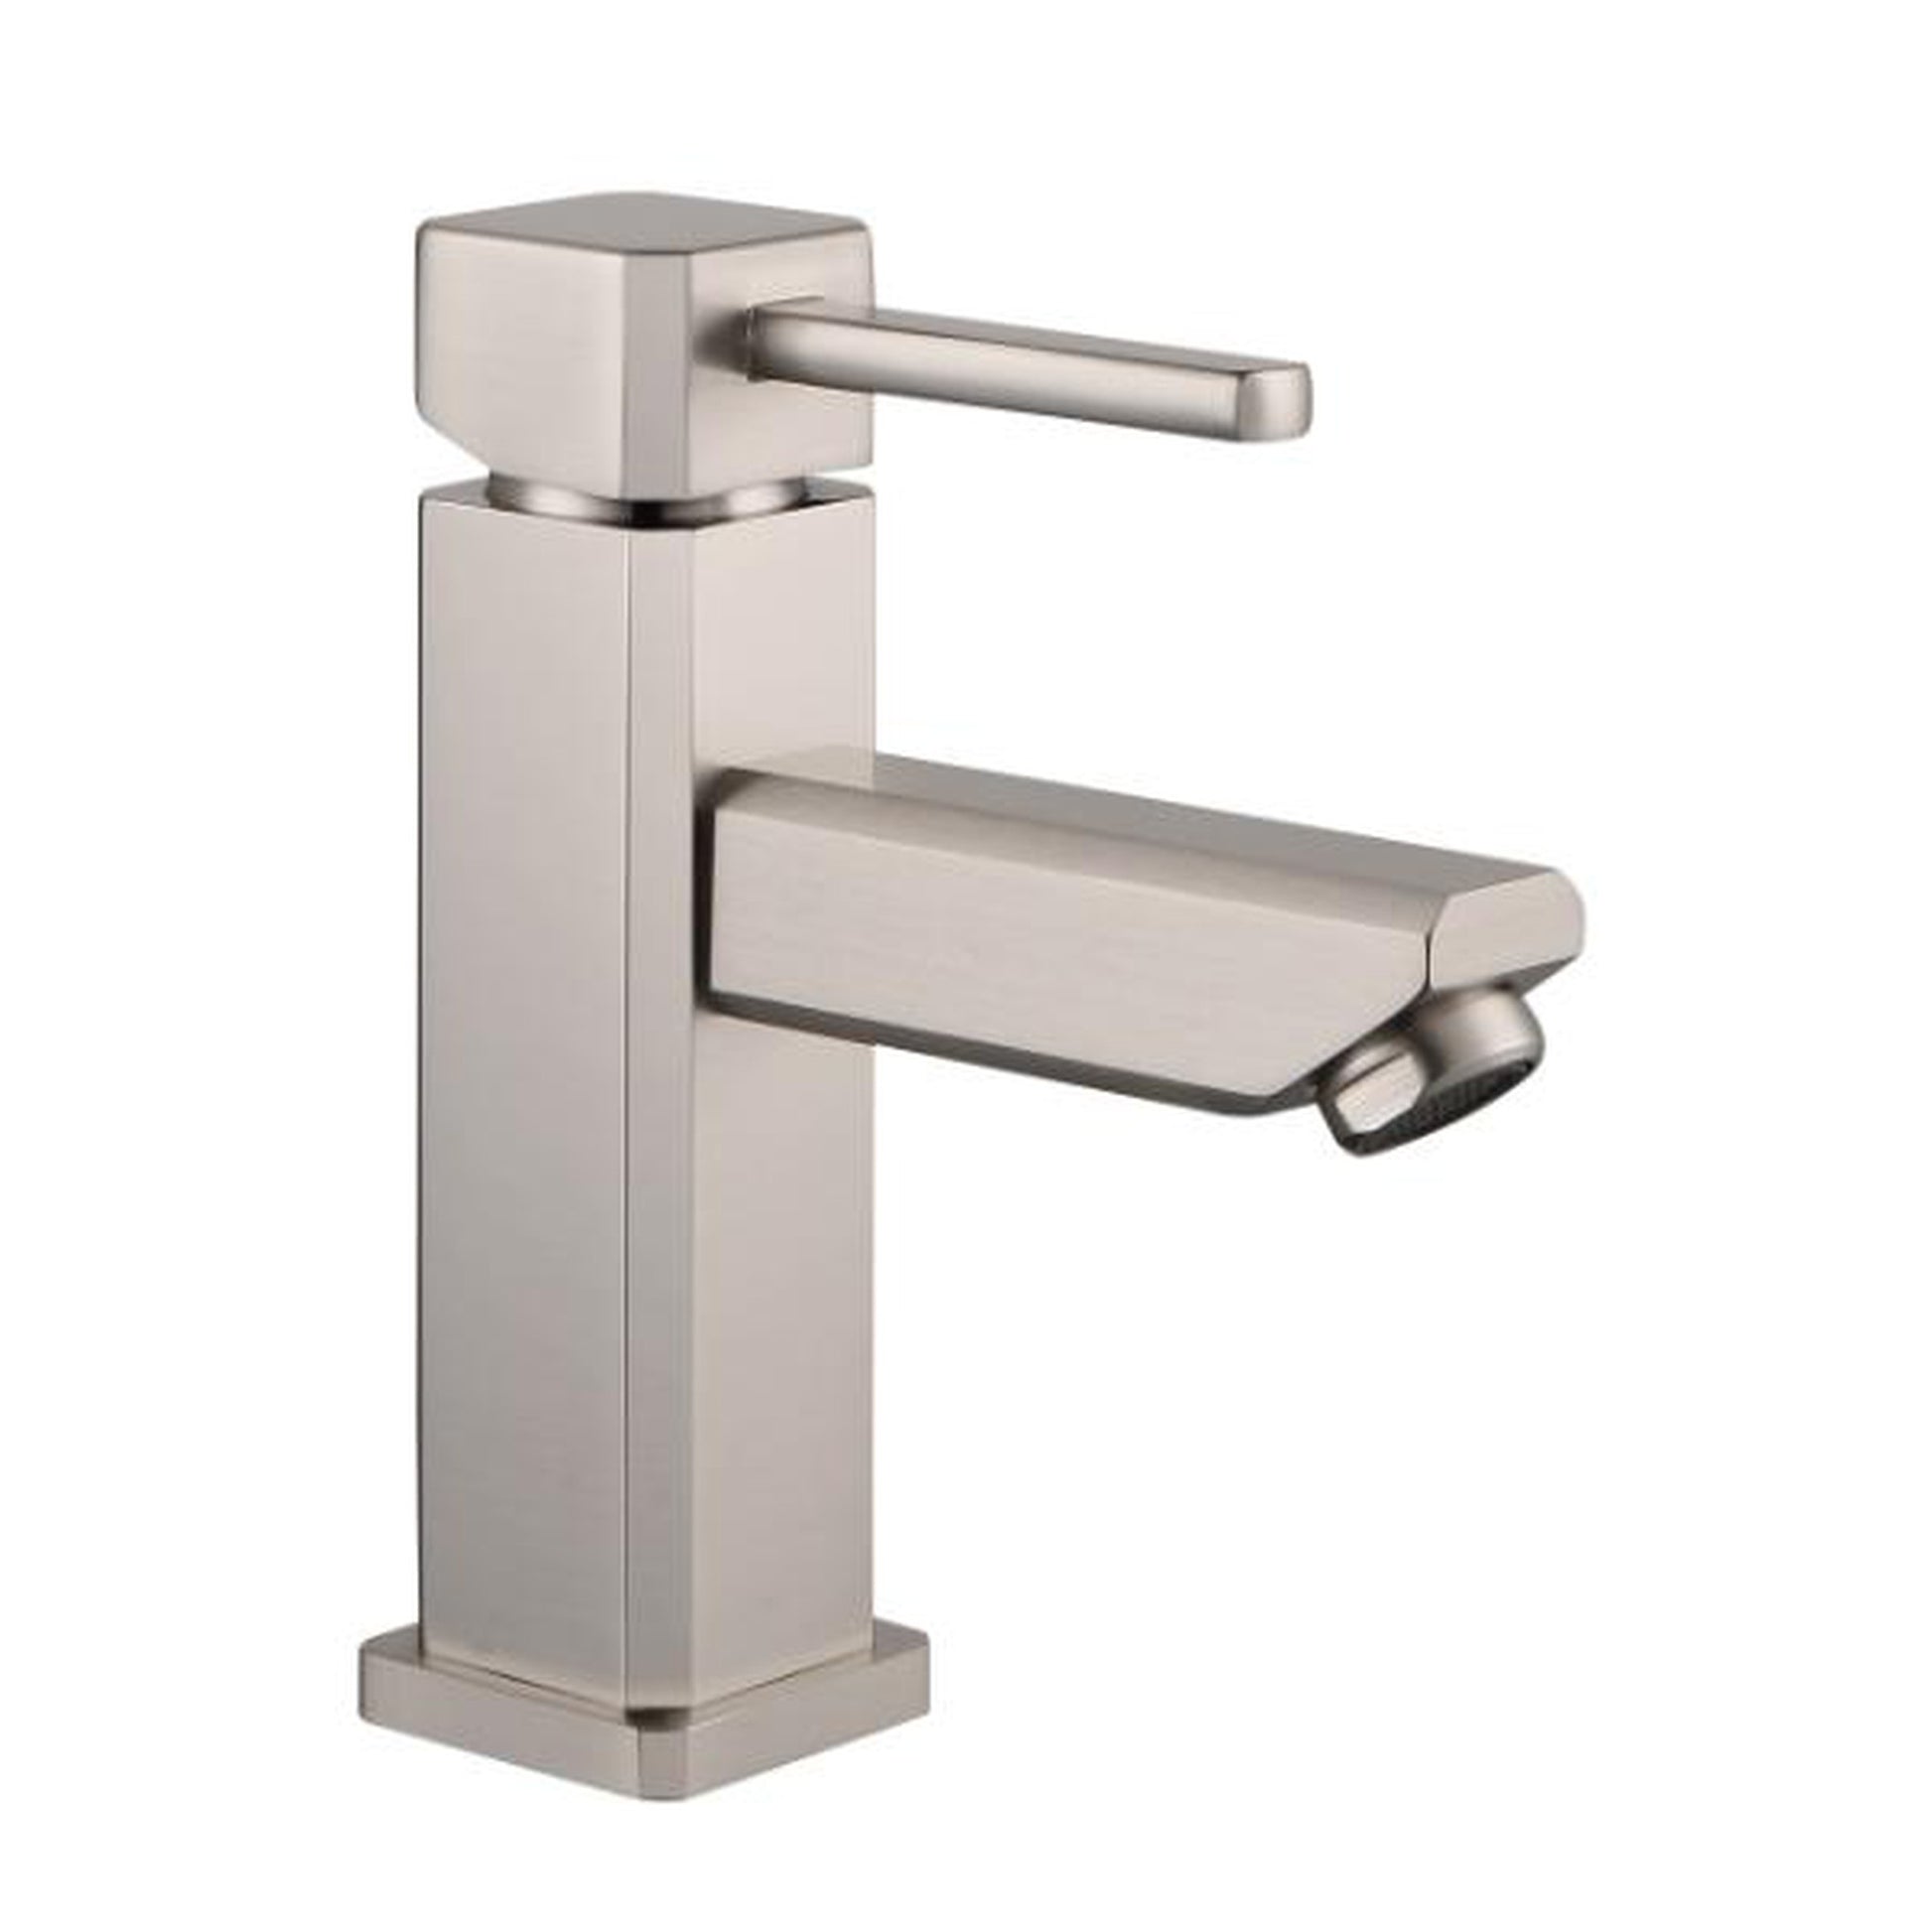 Legion Furniture ZY6301 Brushed Nickel 1.5 GPM Faucet With Pop-up Drain